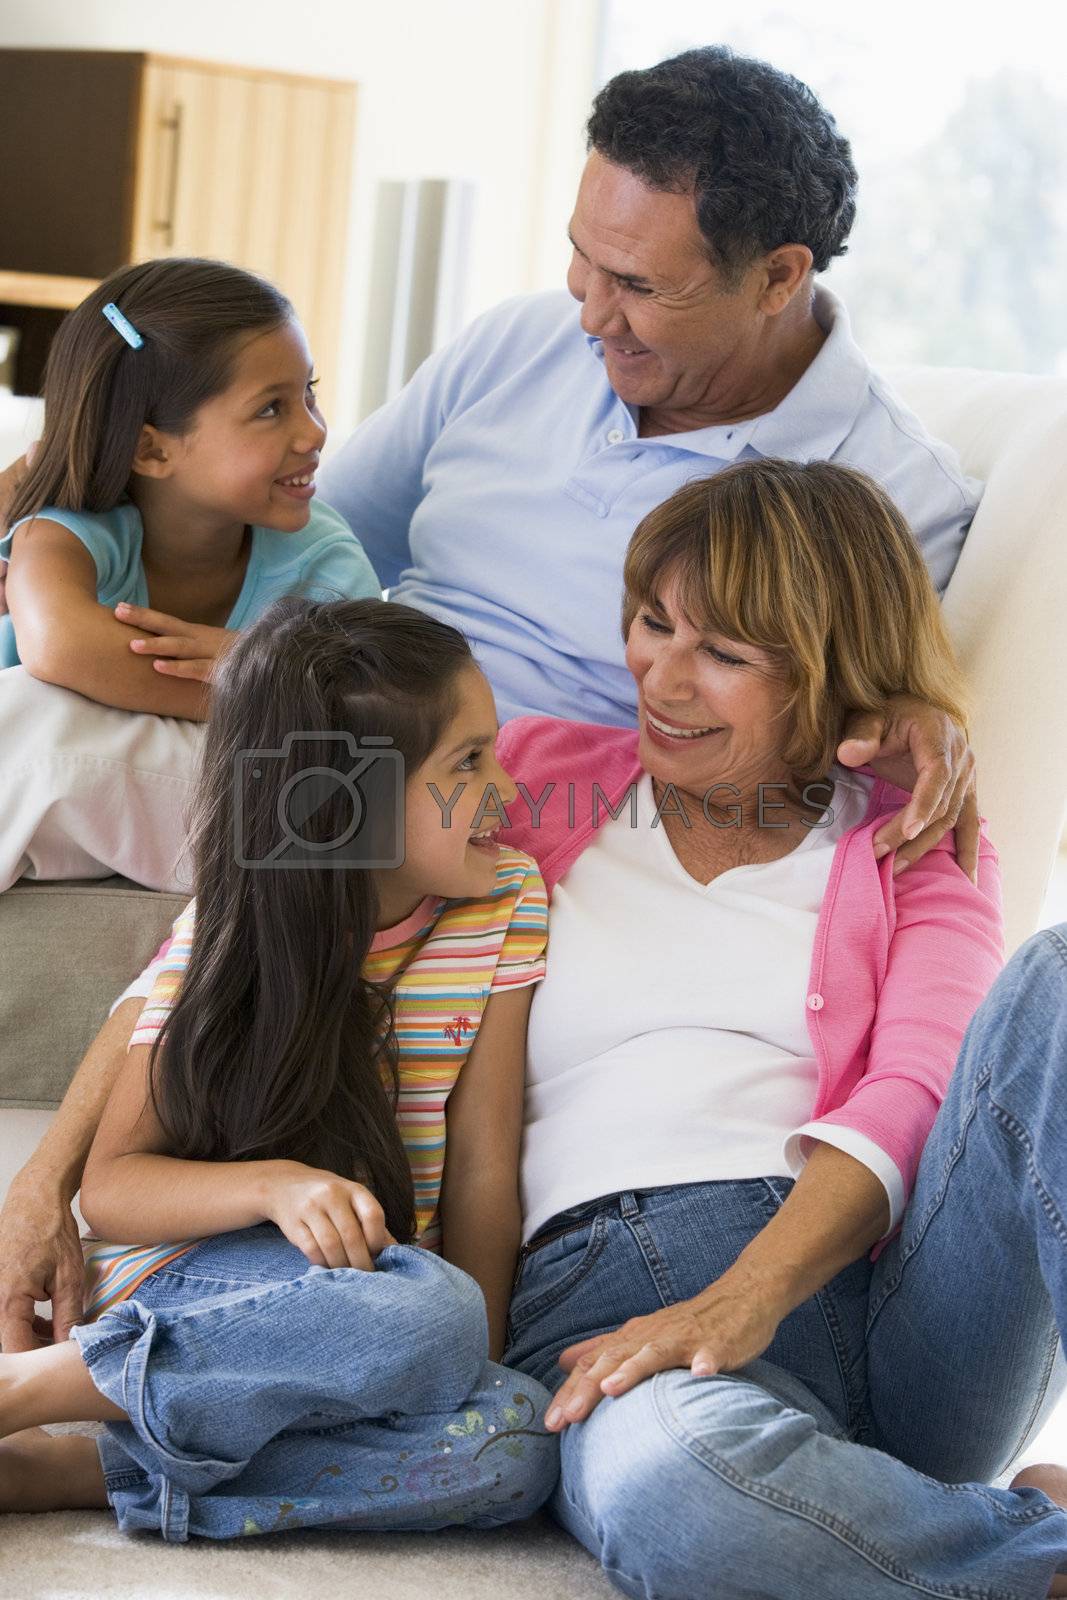 Royalty free image of Grandparents talking with grandchildren by MonkeyBusiness